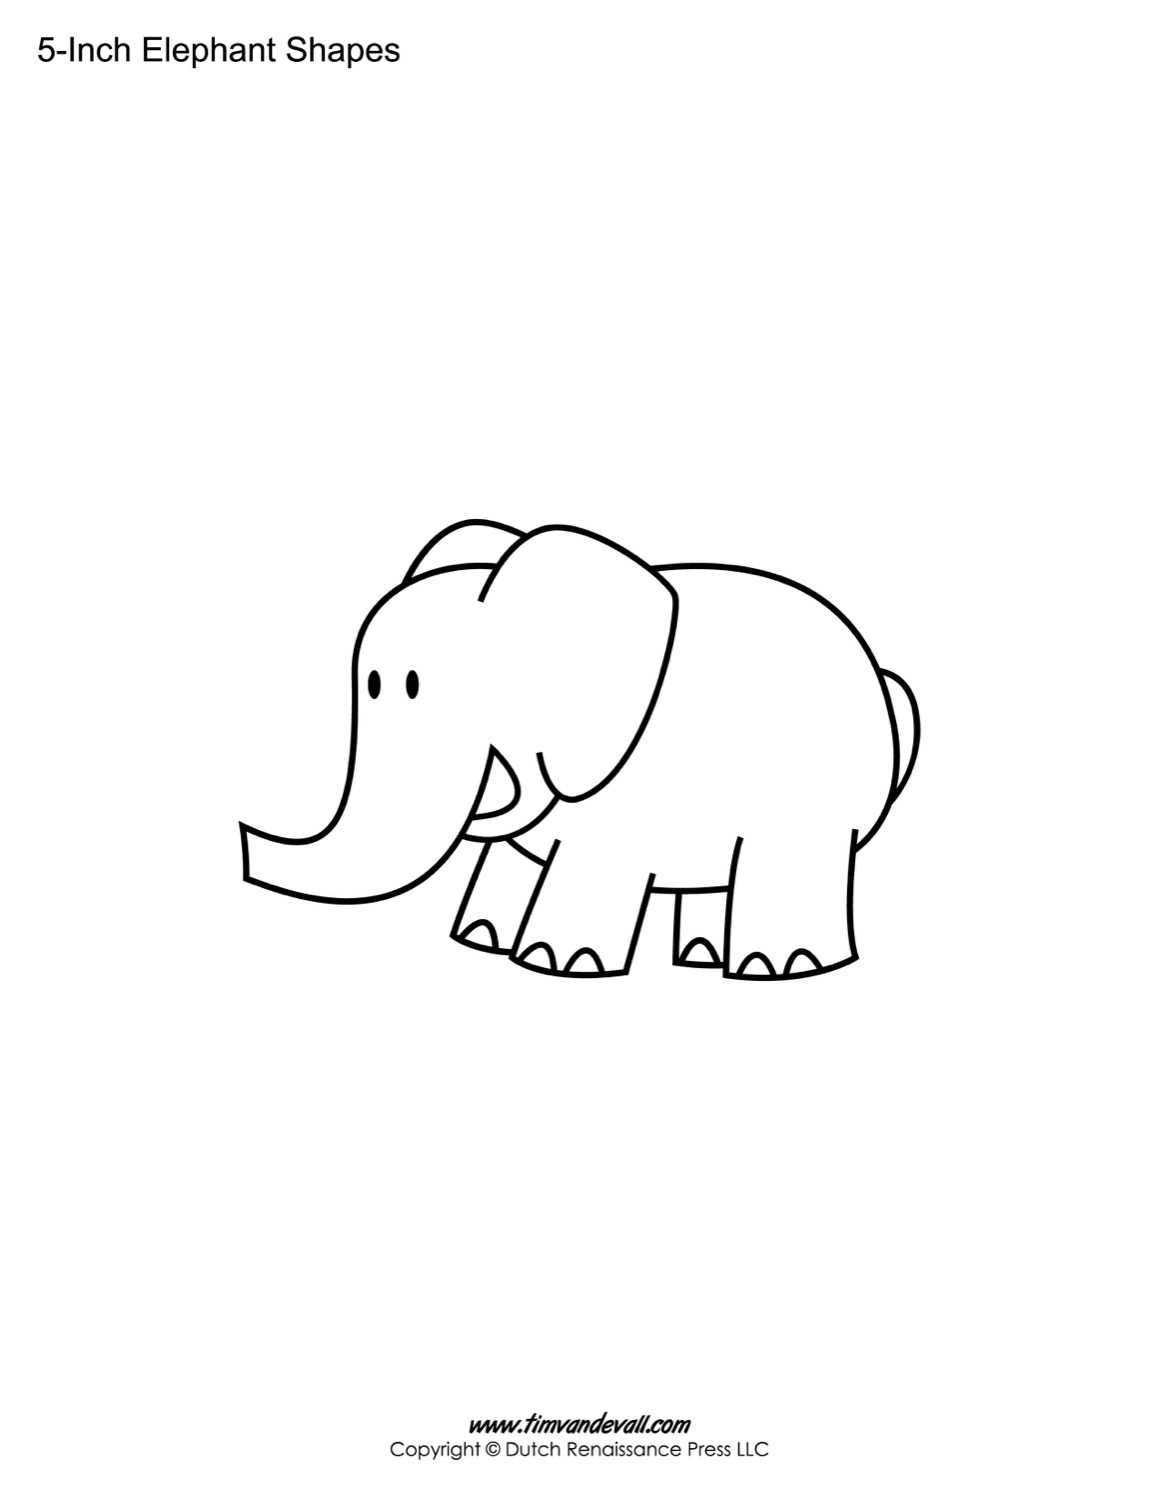 Printable Elephant Templates / Elephant Shapes For Kids Intended For Blank Elephant Template